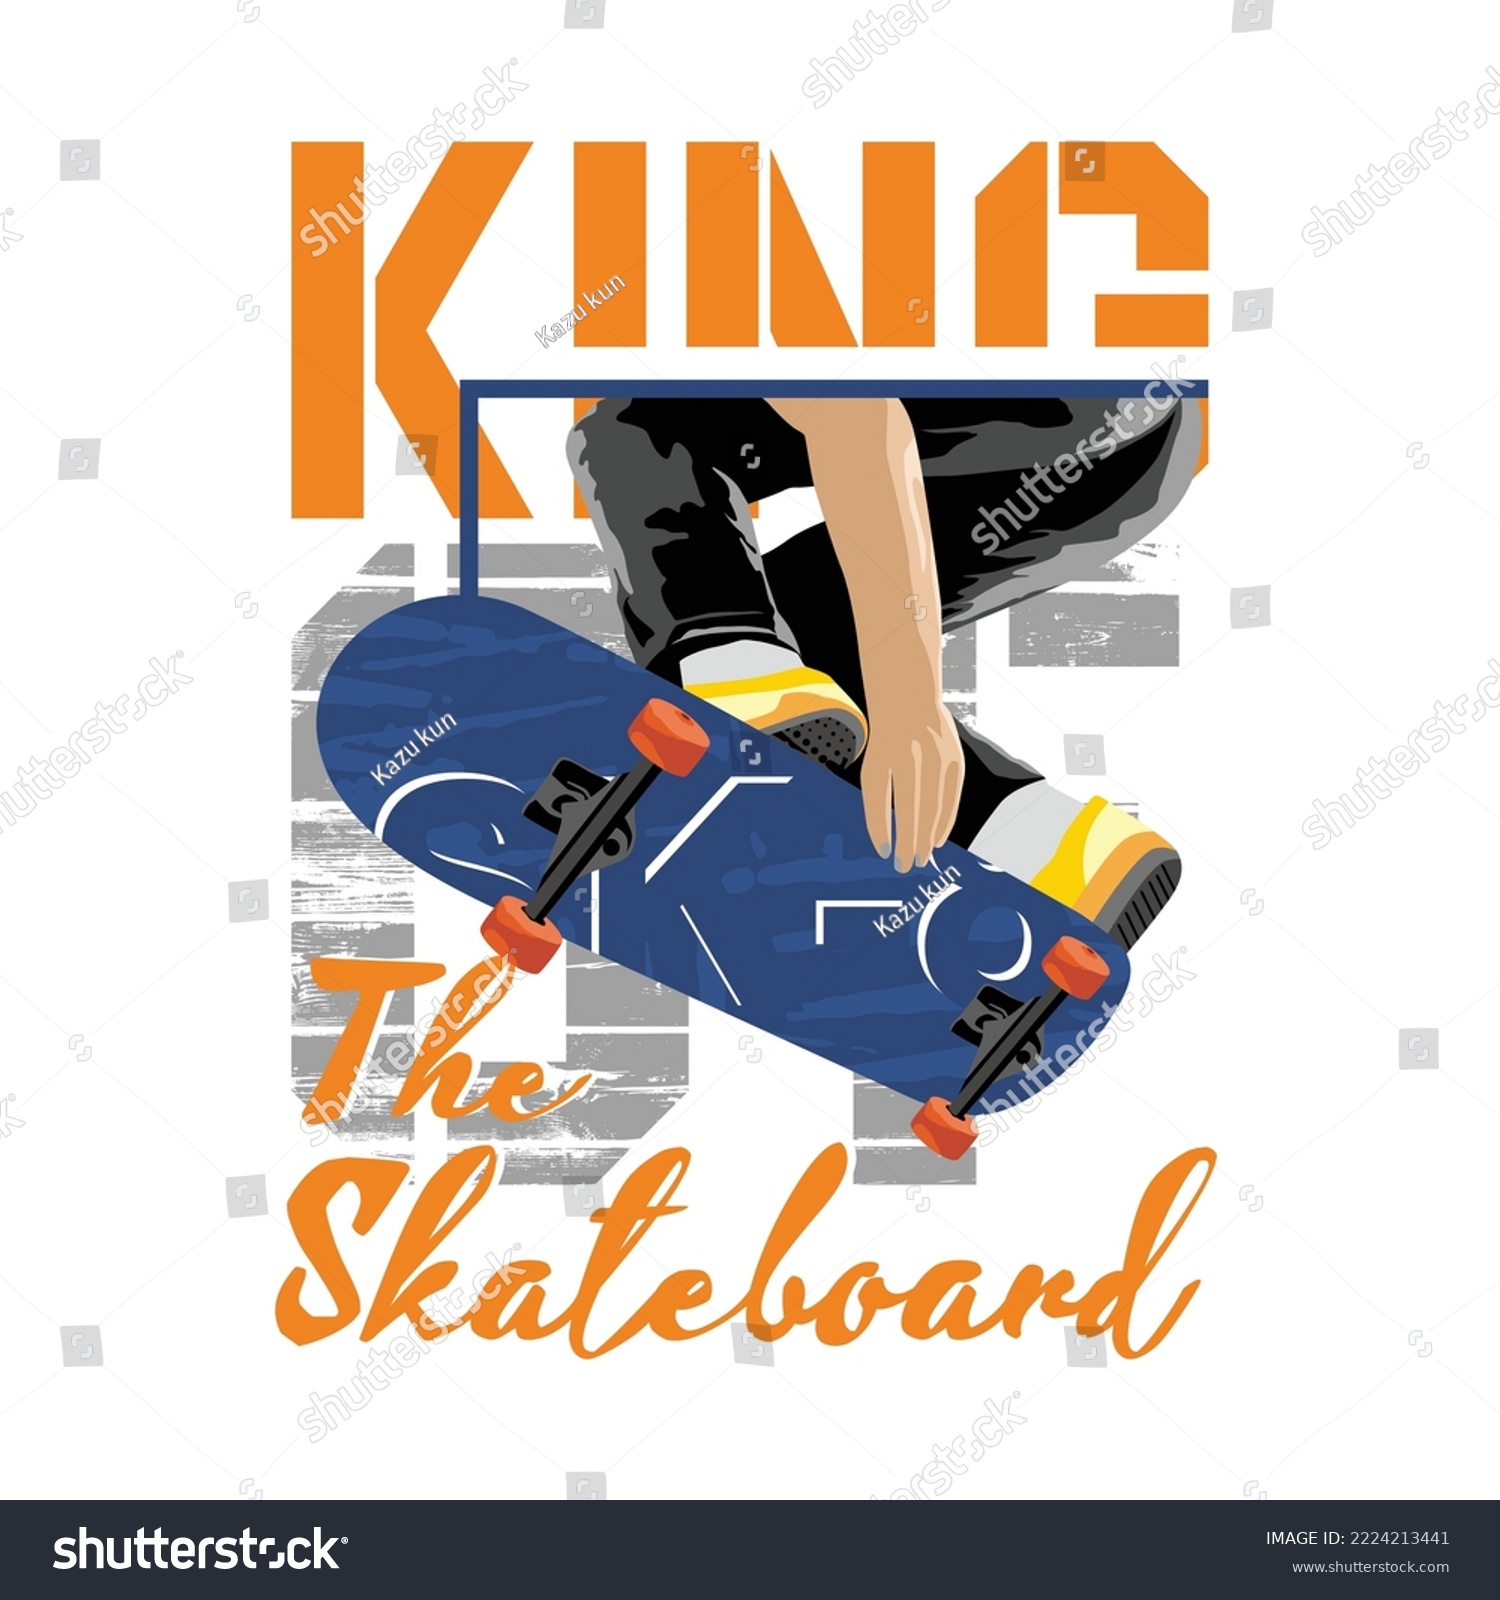 King skateboard with skateboarder Illustration, Vector graphic for apparel prints, posters and other uses #2224213441